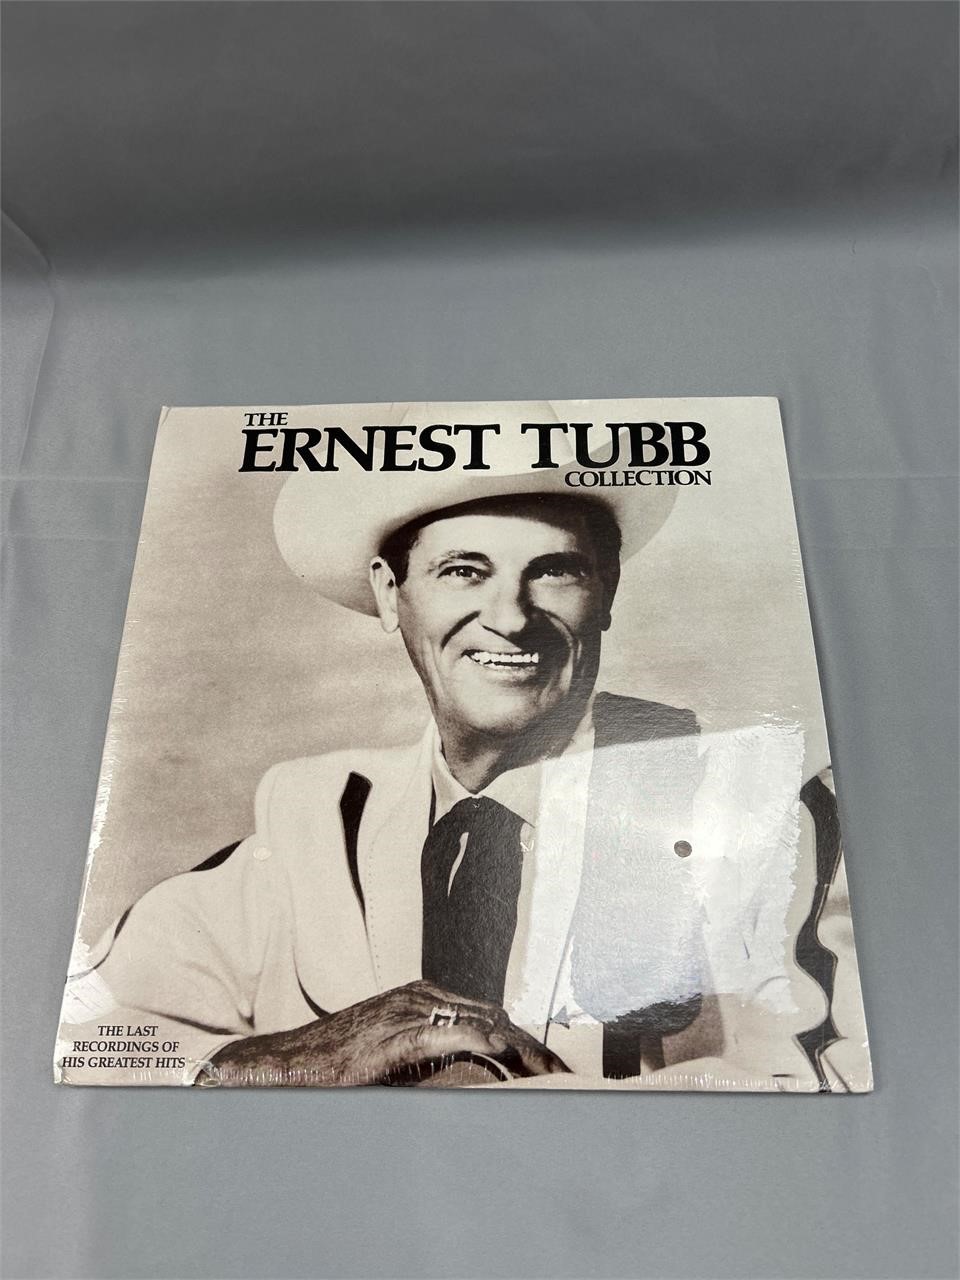 The Earnest Tubb Collection. Still in original pac